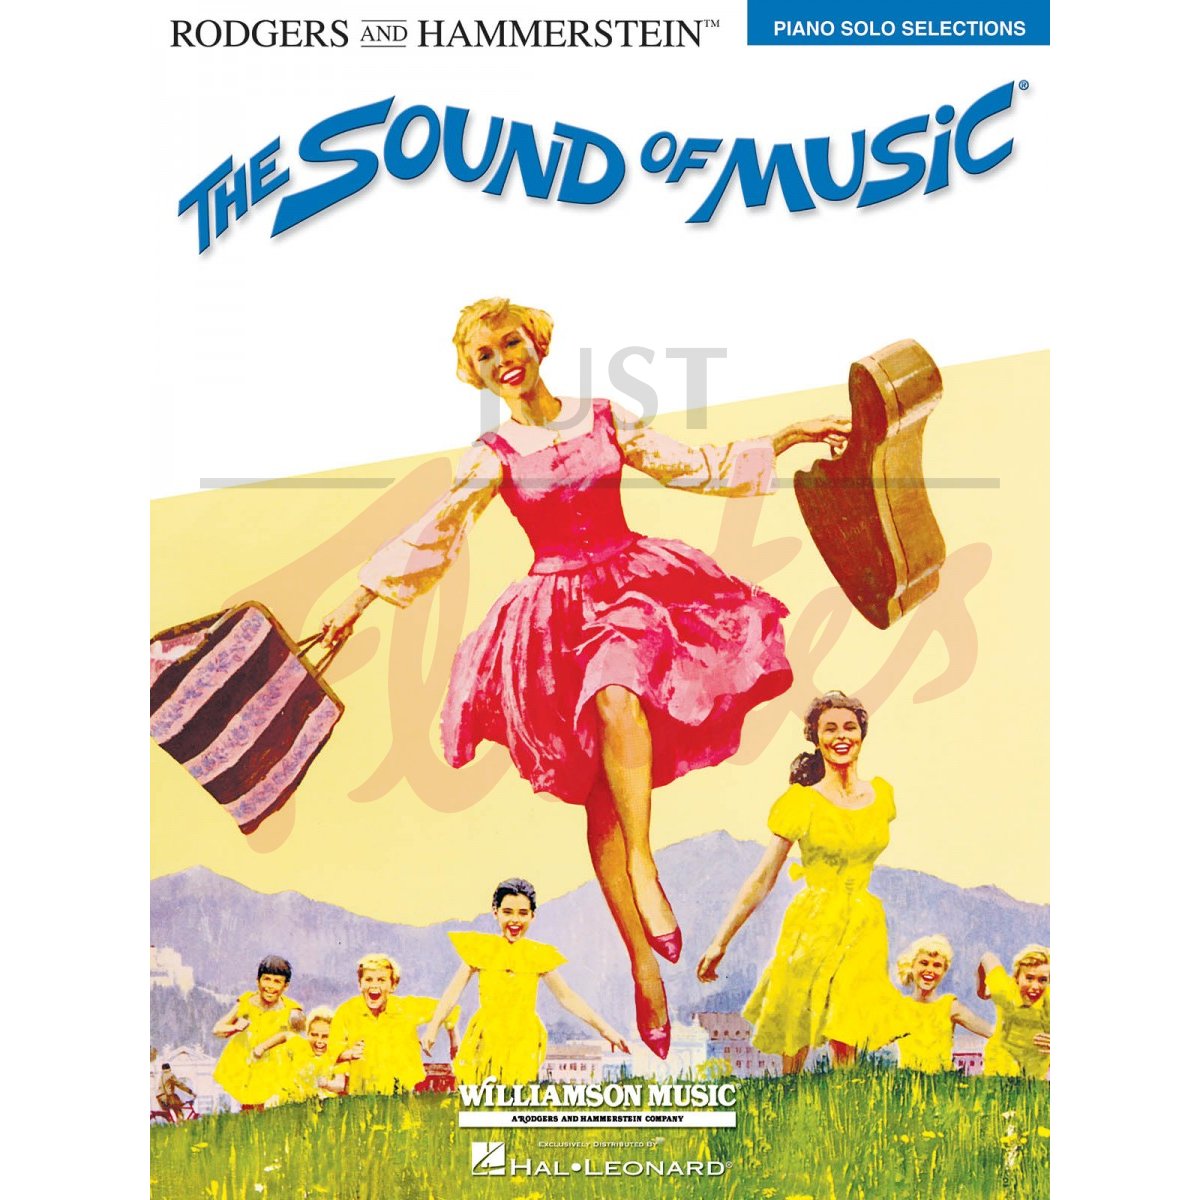 The Sound Of Music [Piano Solo Selections]